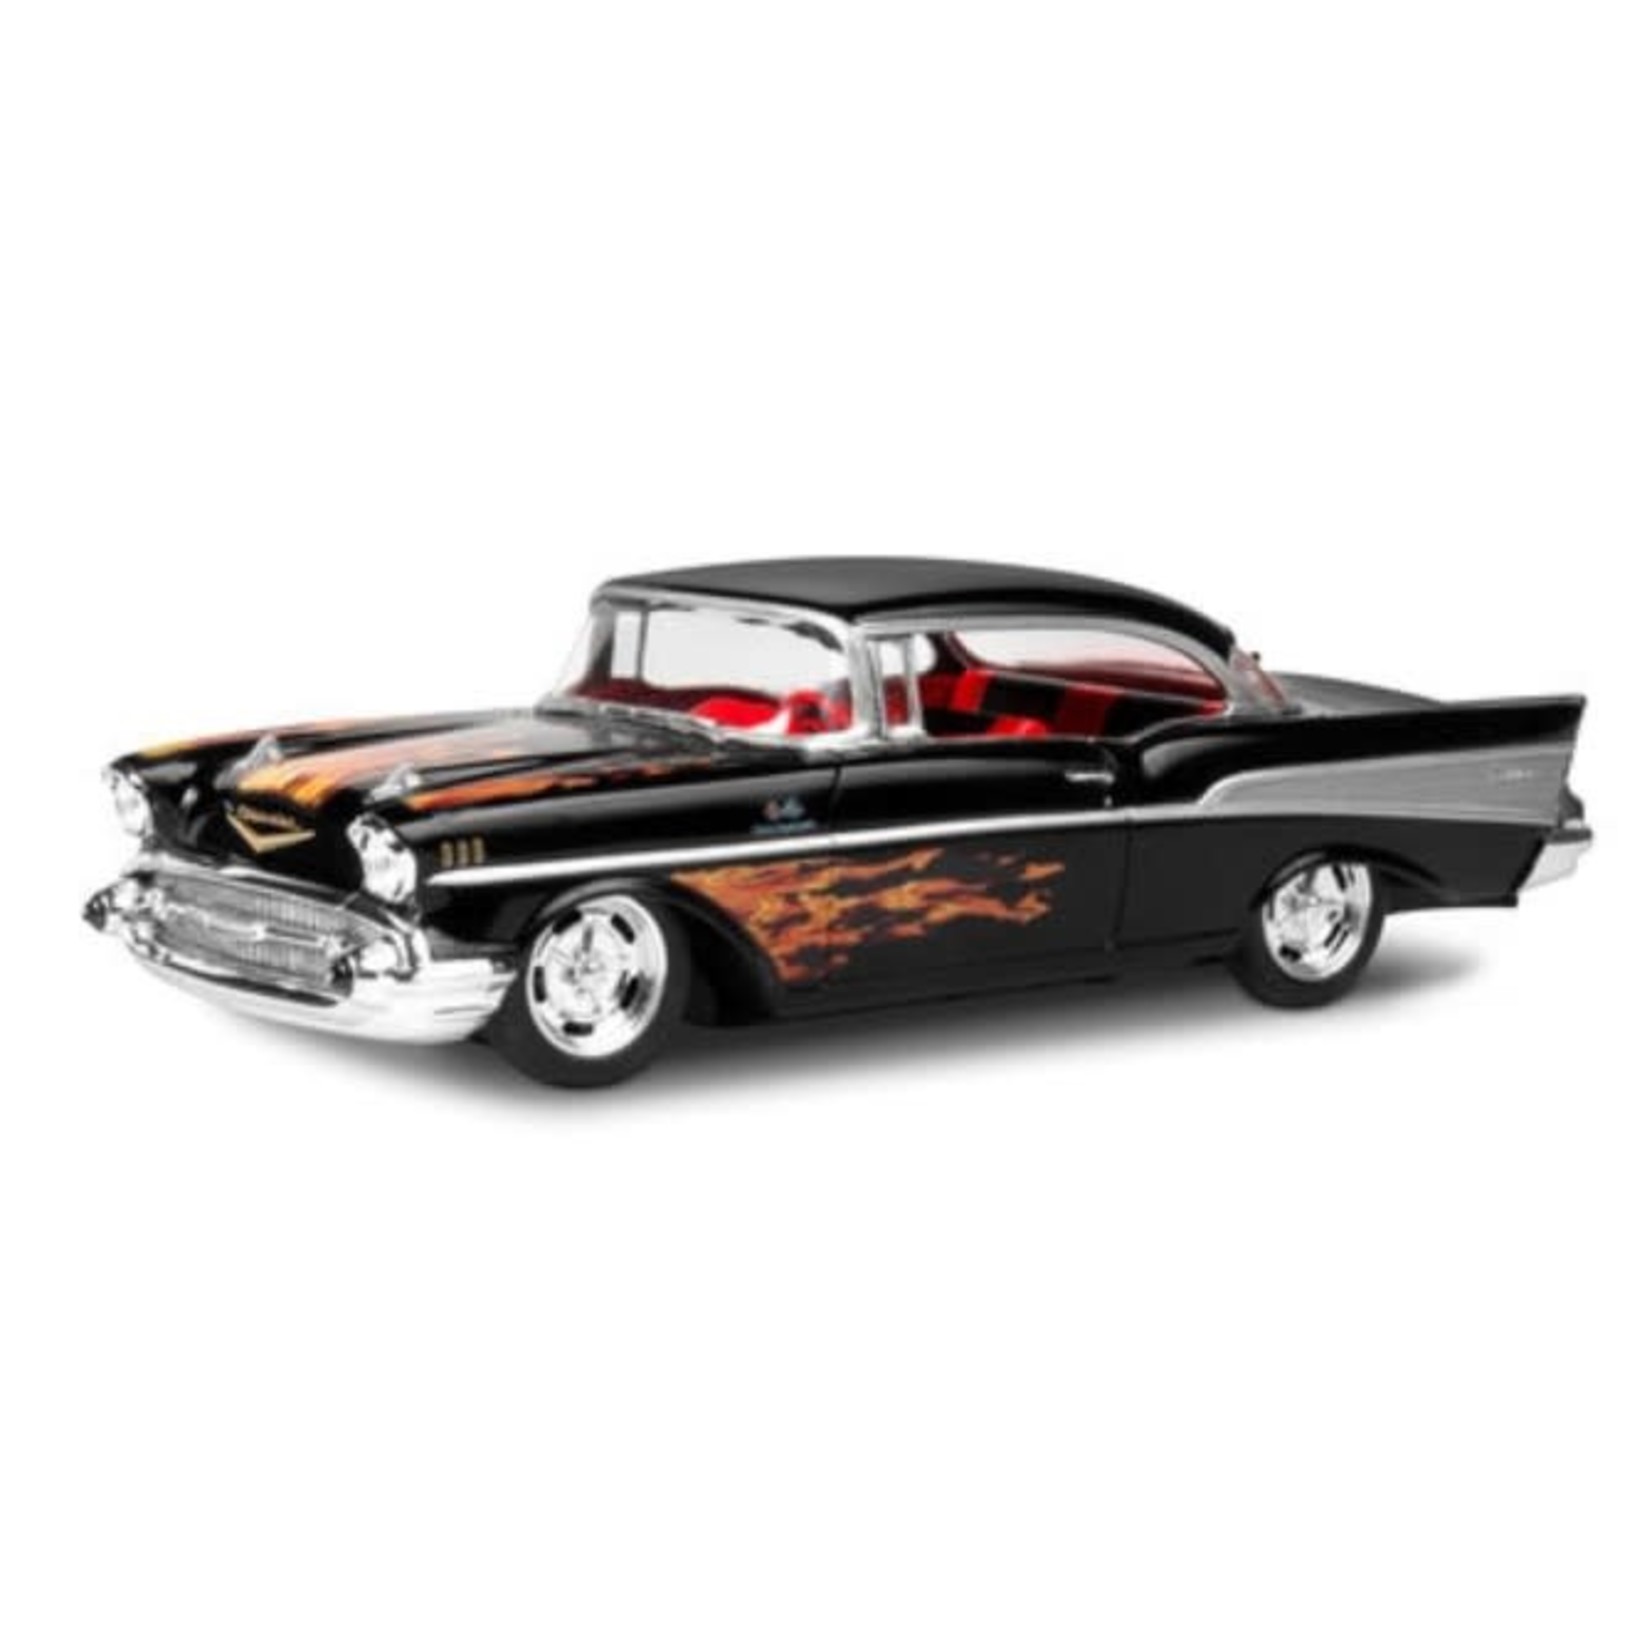 Revell 1/25 '57 Chevy Belair Snap Together Kit